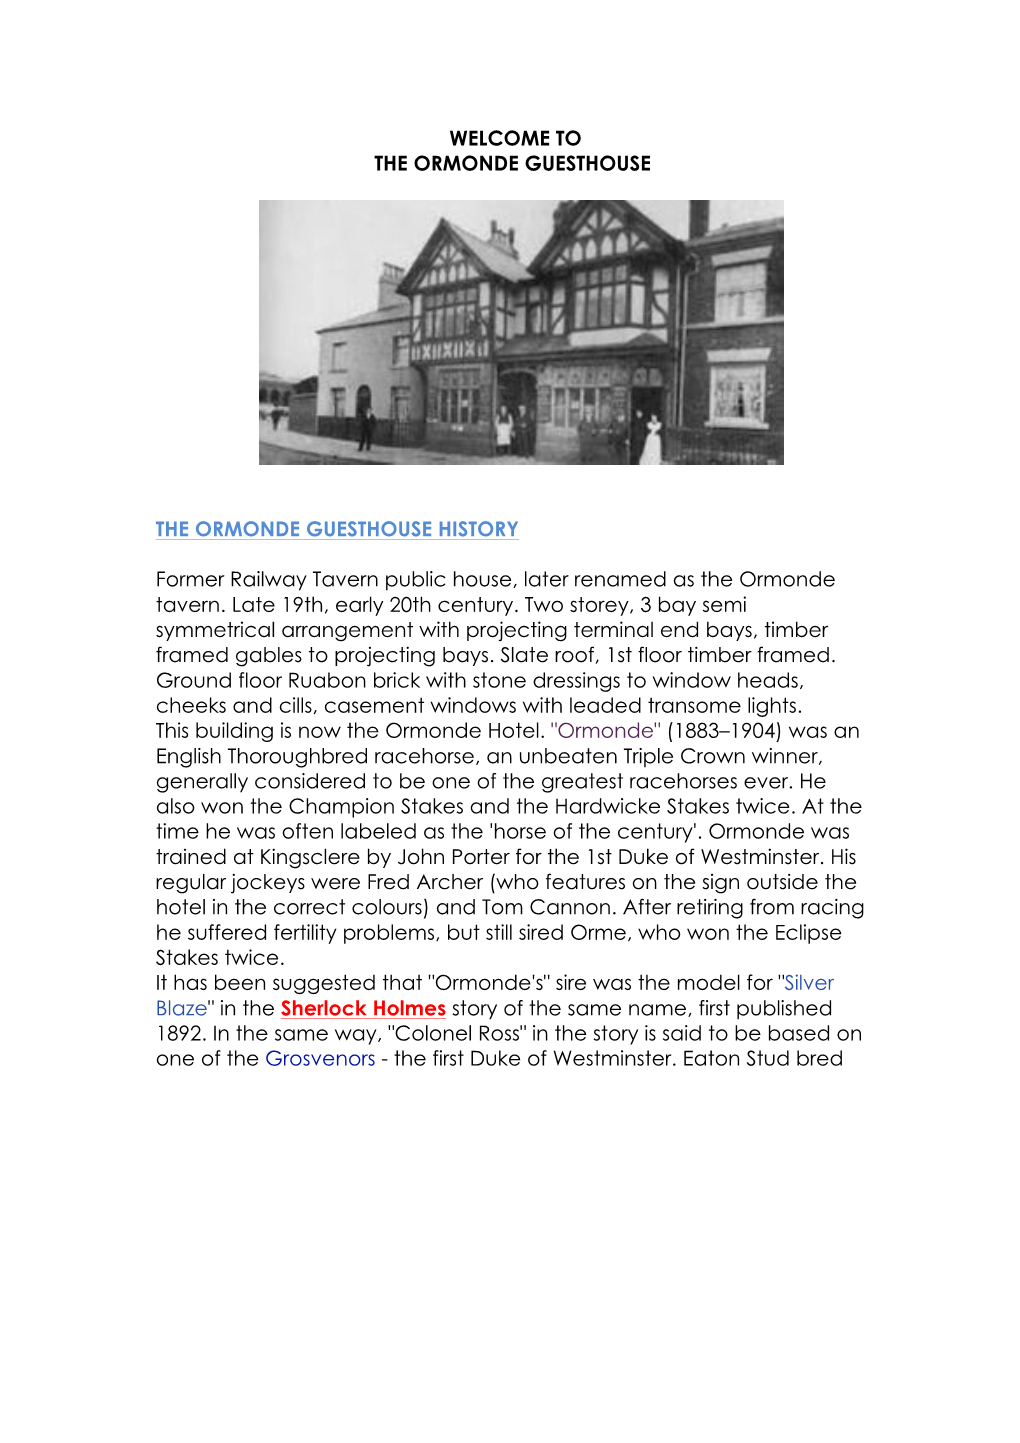 History of the Ormonde